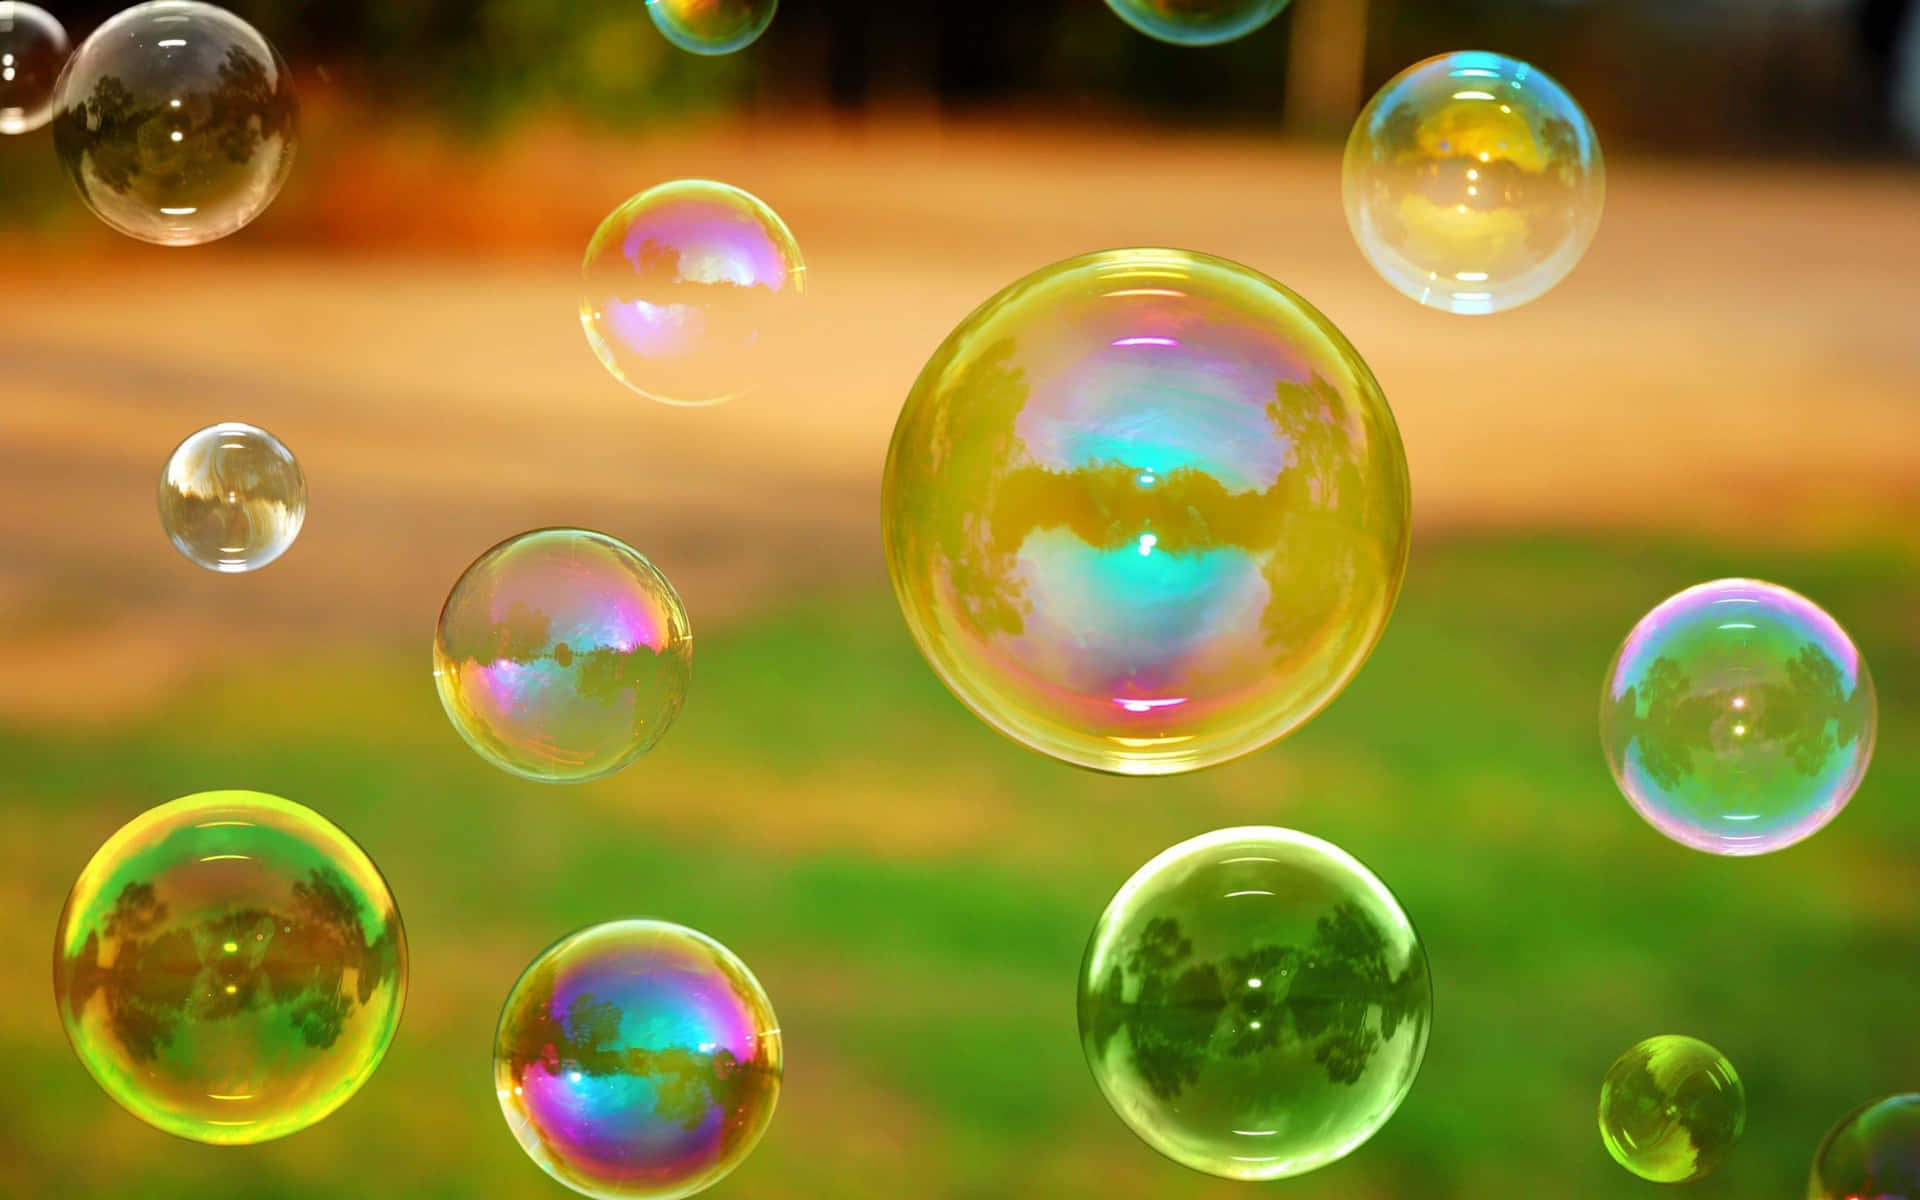 Enjoy the luxury of floating in a universe full of beautiful and colorful bubbles